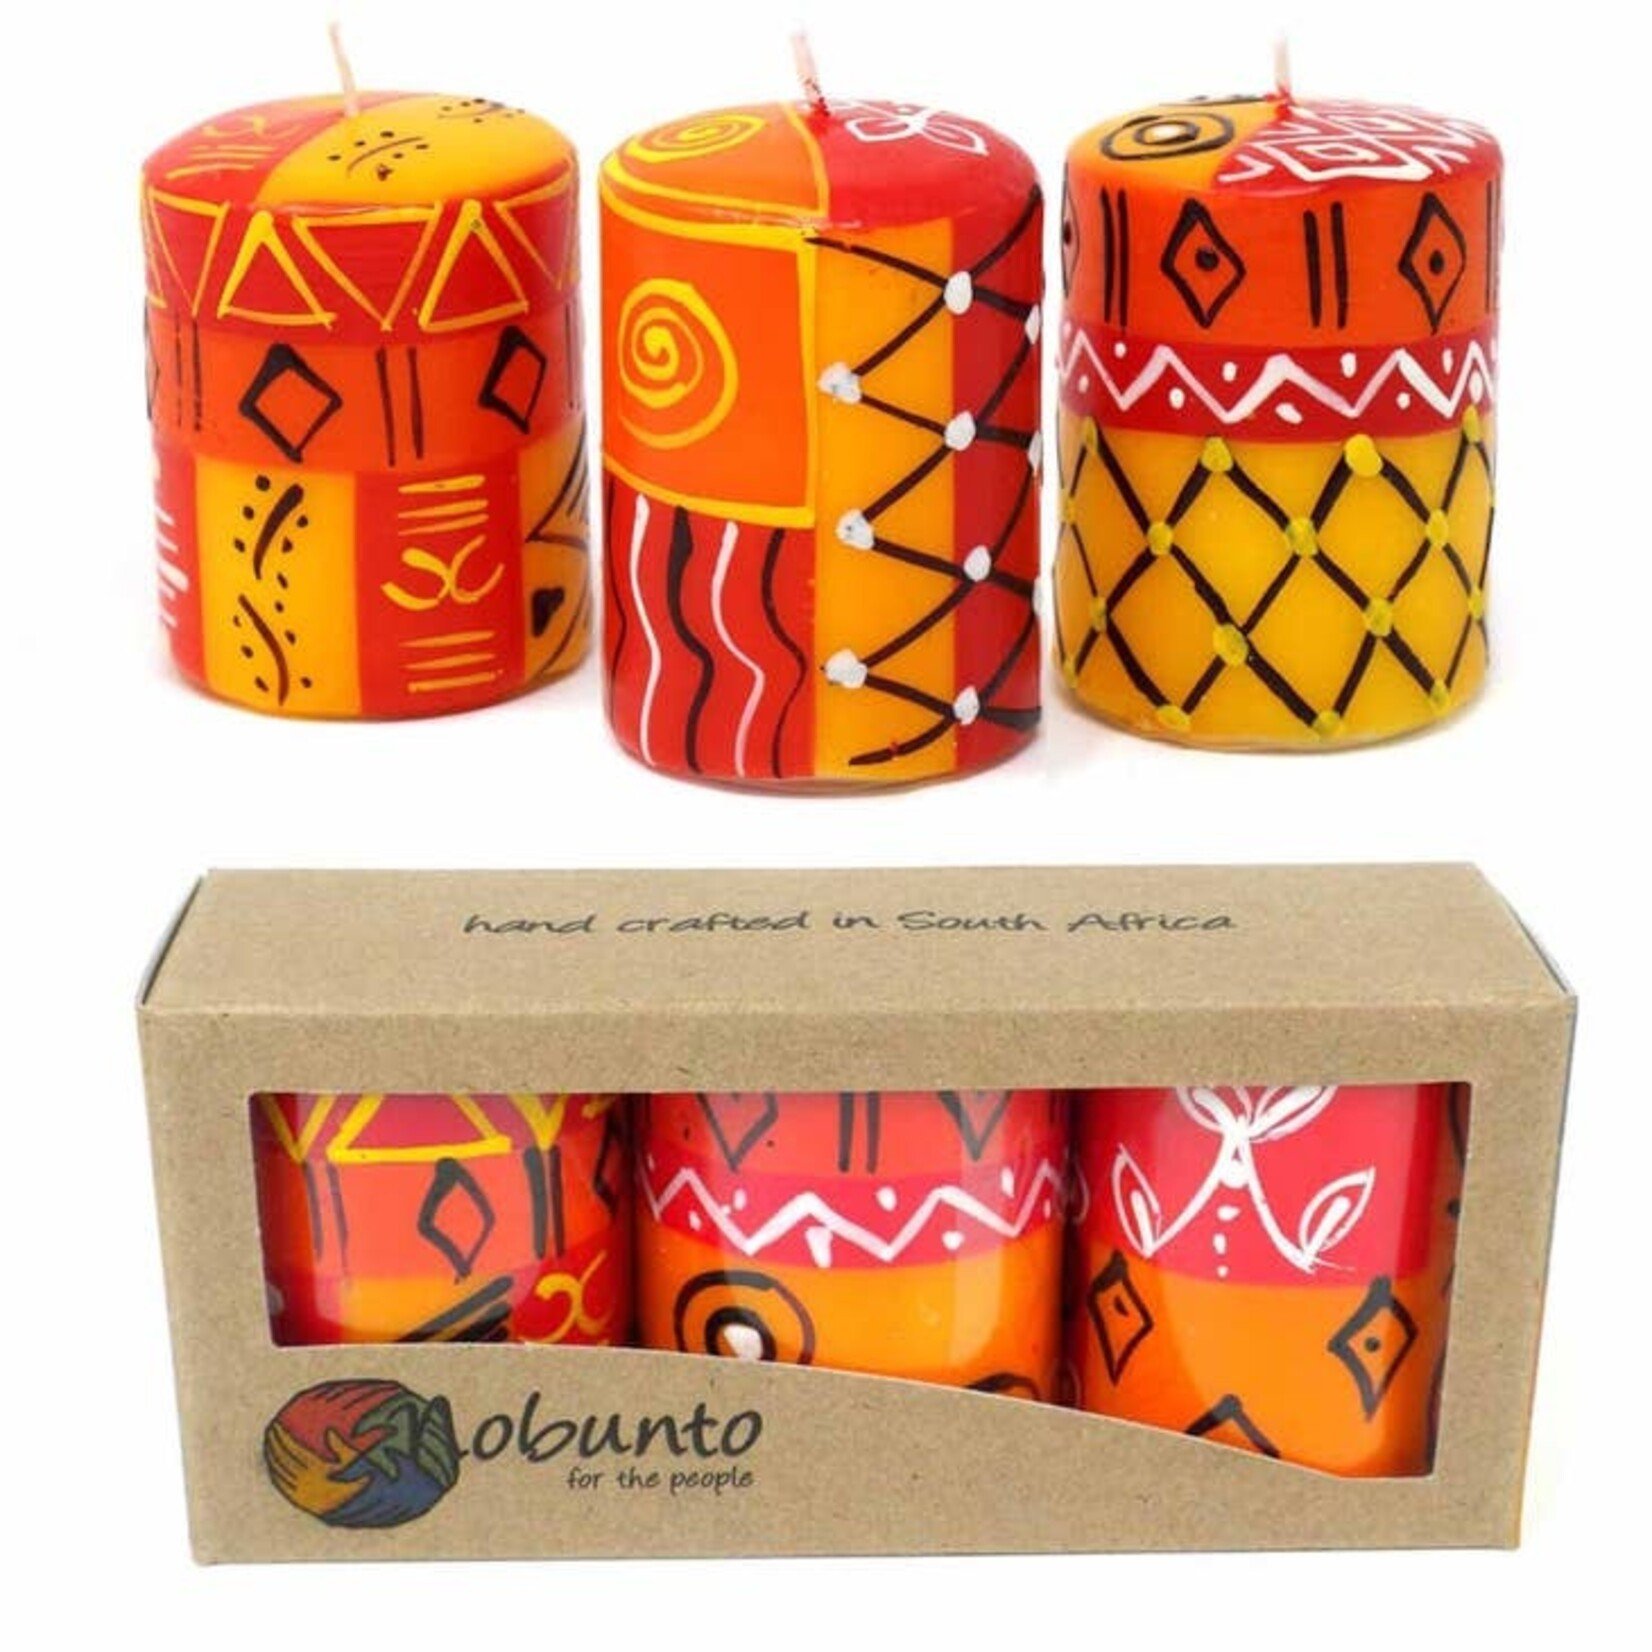 Global Crafts Hand Painted Votive Candles Set of 3 - Zahabu Design, South Africa